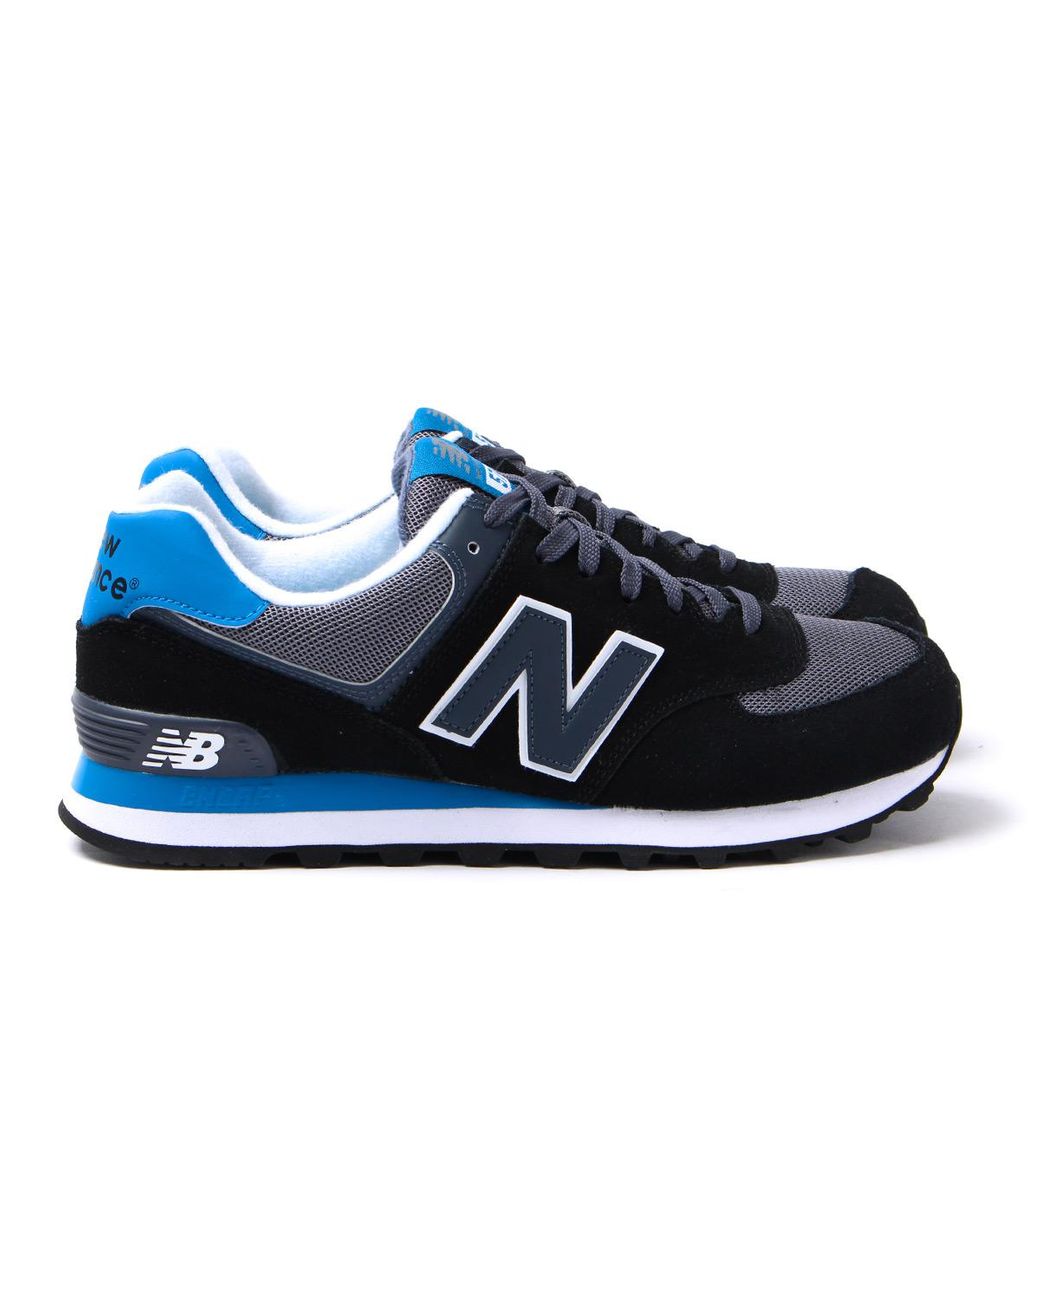 New Balance 574 Royal Blue & Black Sleek Suede Trainers for Men | Lyst